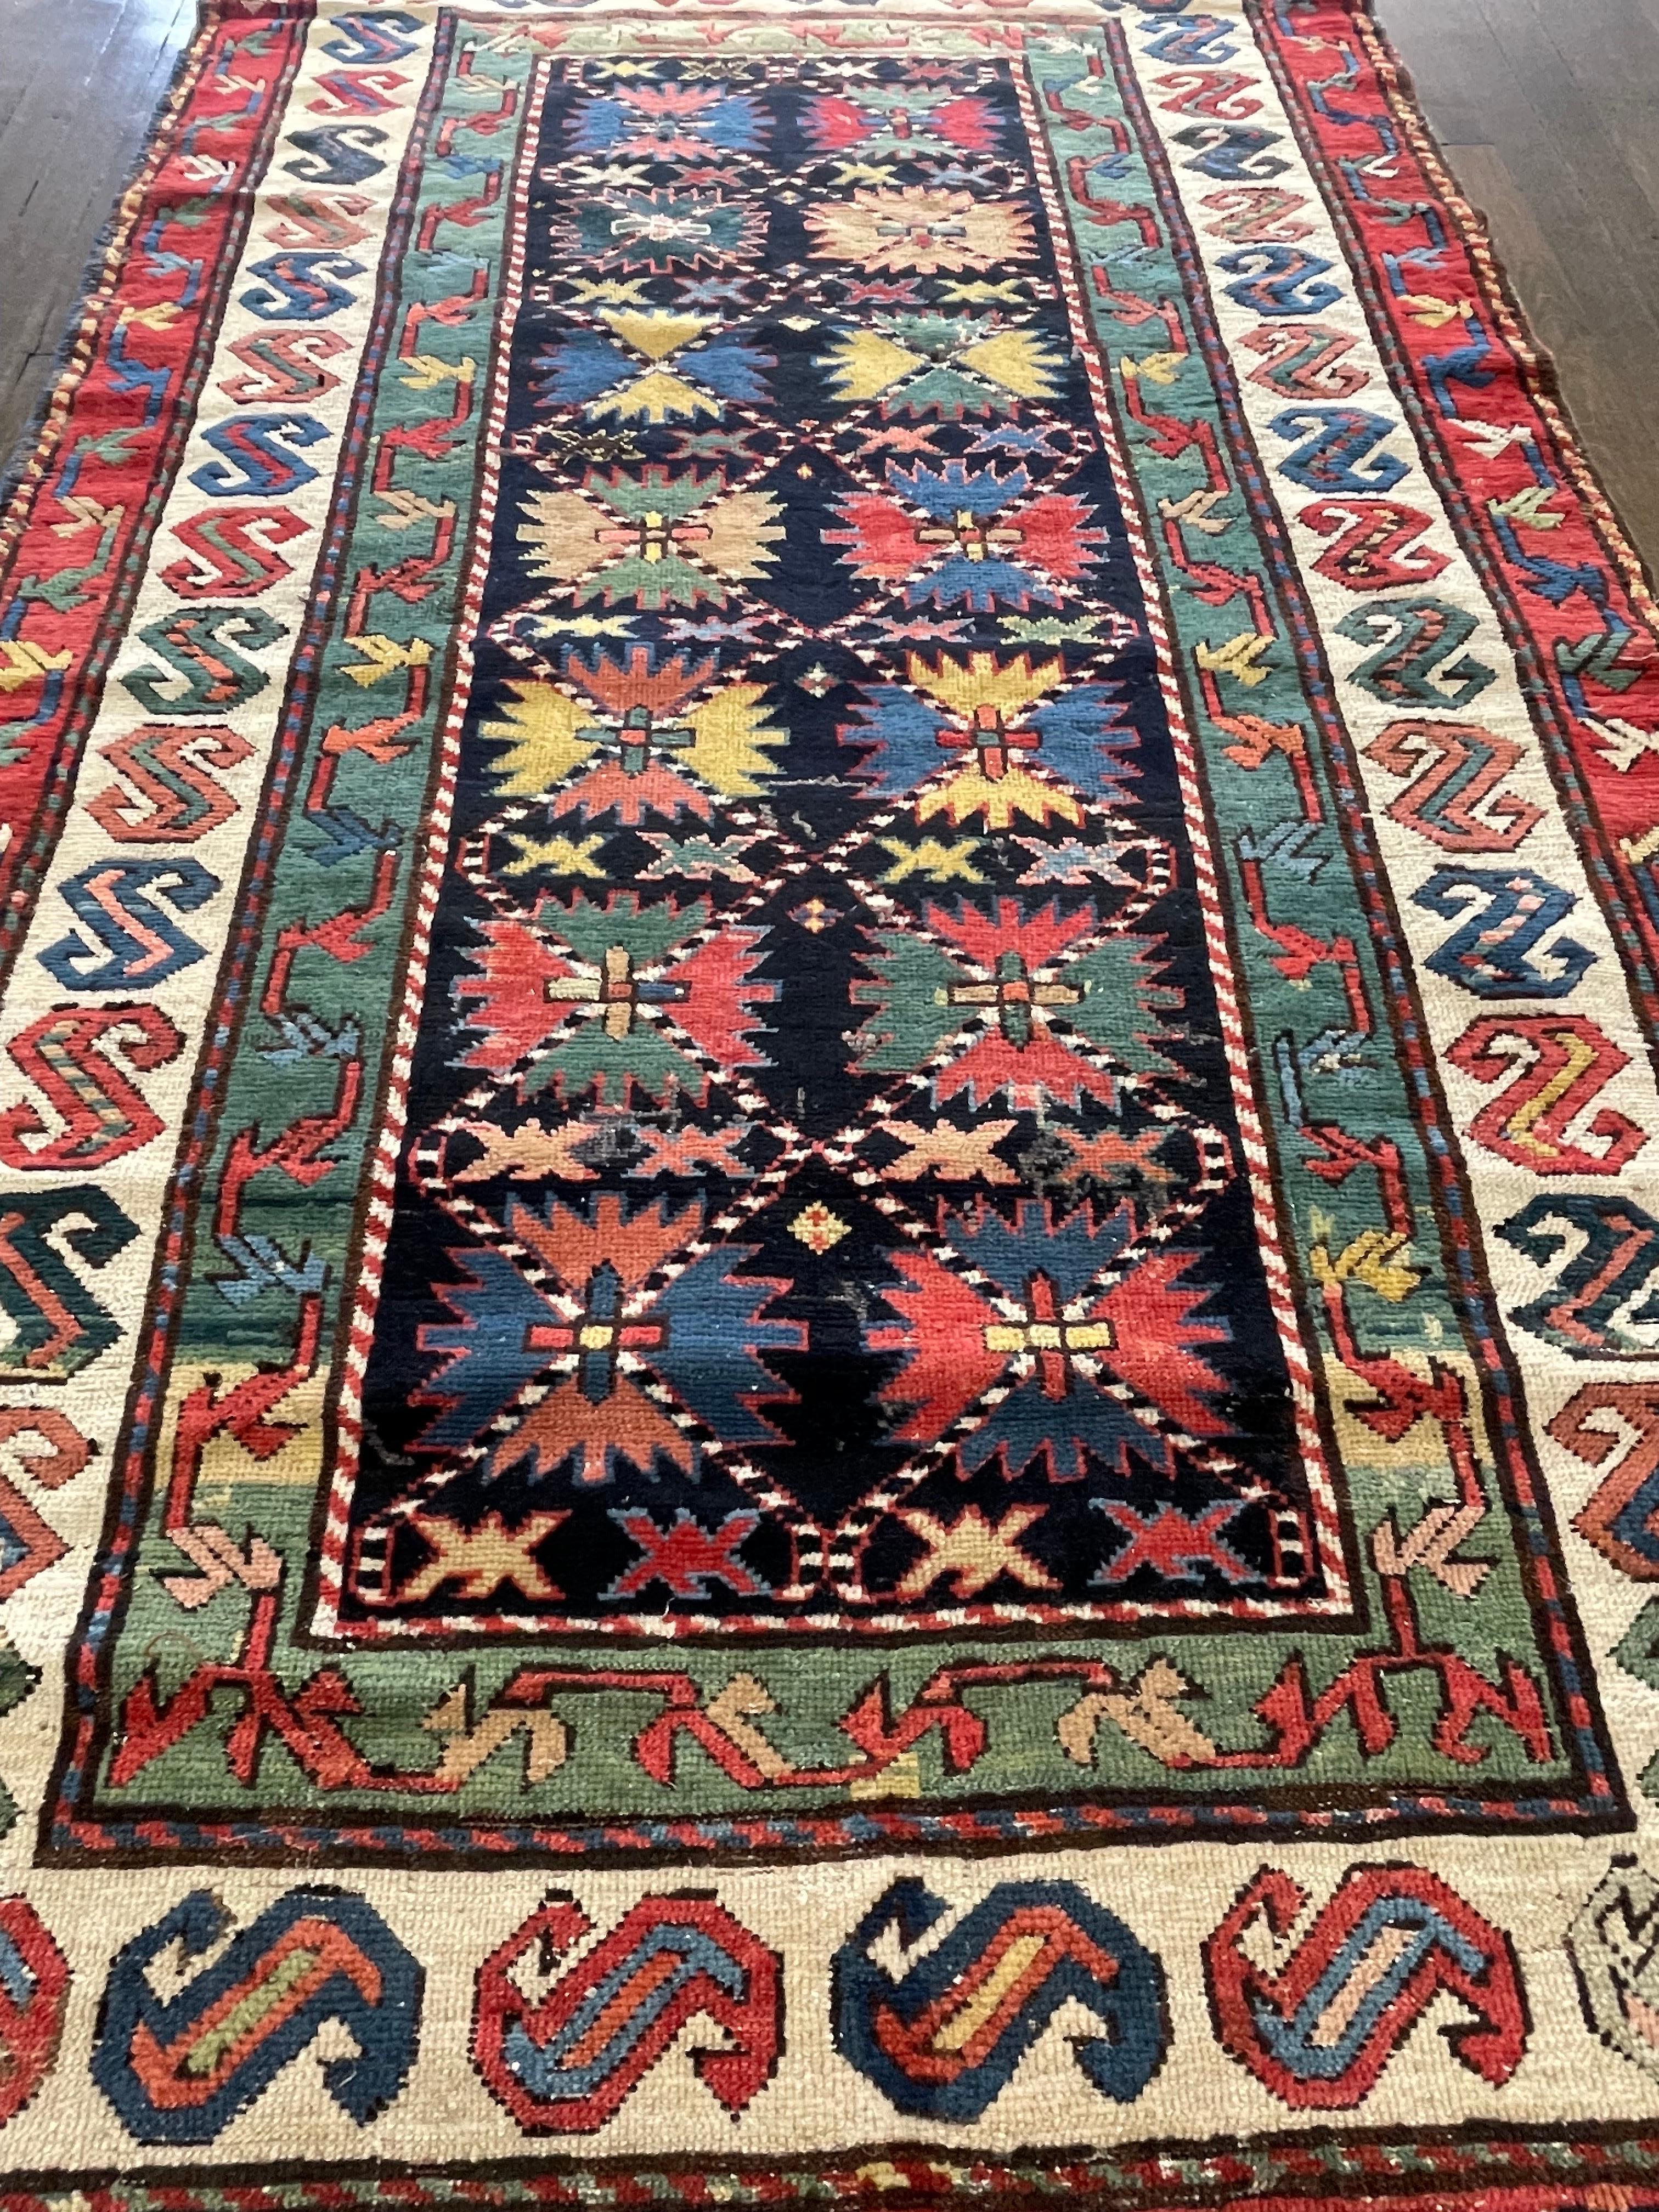 A spectacular antique caucasian carpet decorated with an unusual twenty- point Lesghi star. The rug features boldly contrasted colors of indigo blue for the field and three wide borders of green, Ivory and maroon red respectively. Few caucasian rugs